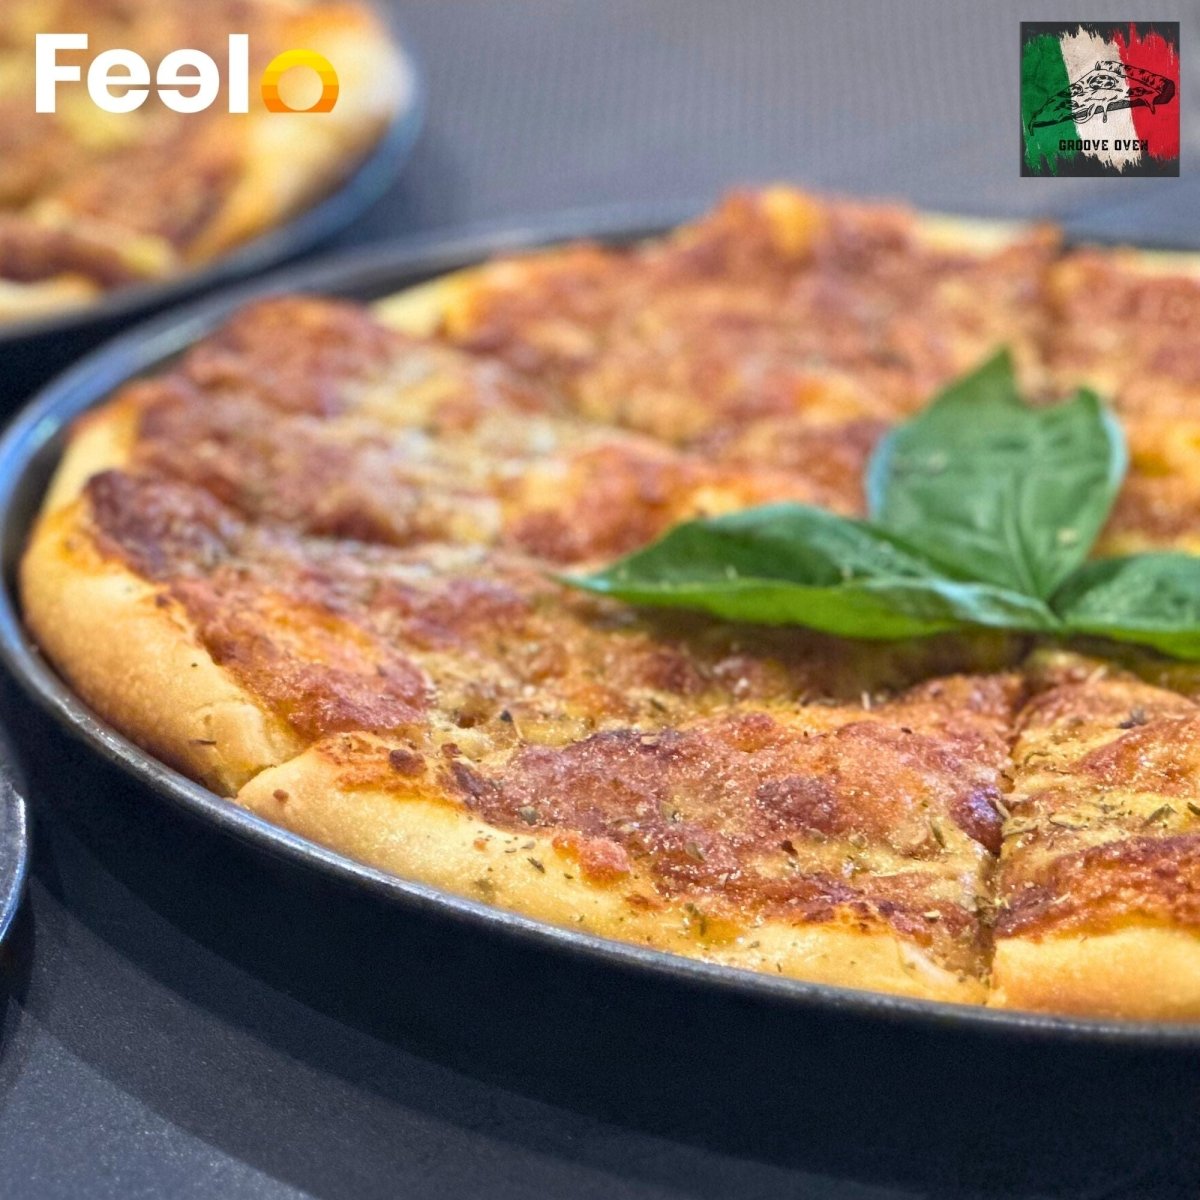 2x 9 inch Pizzas (1 Margherita + Second pizza of your choice) + 2x drinks Free - Lemon Multi-Cuisine Restaurant (Groove Oven), Colombo 02 | Feelo